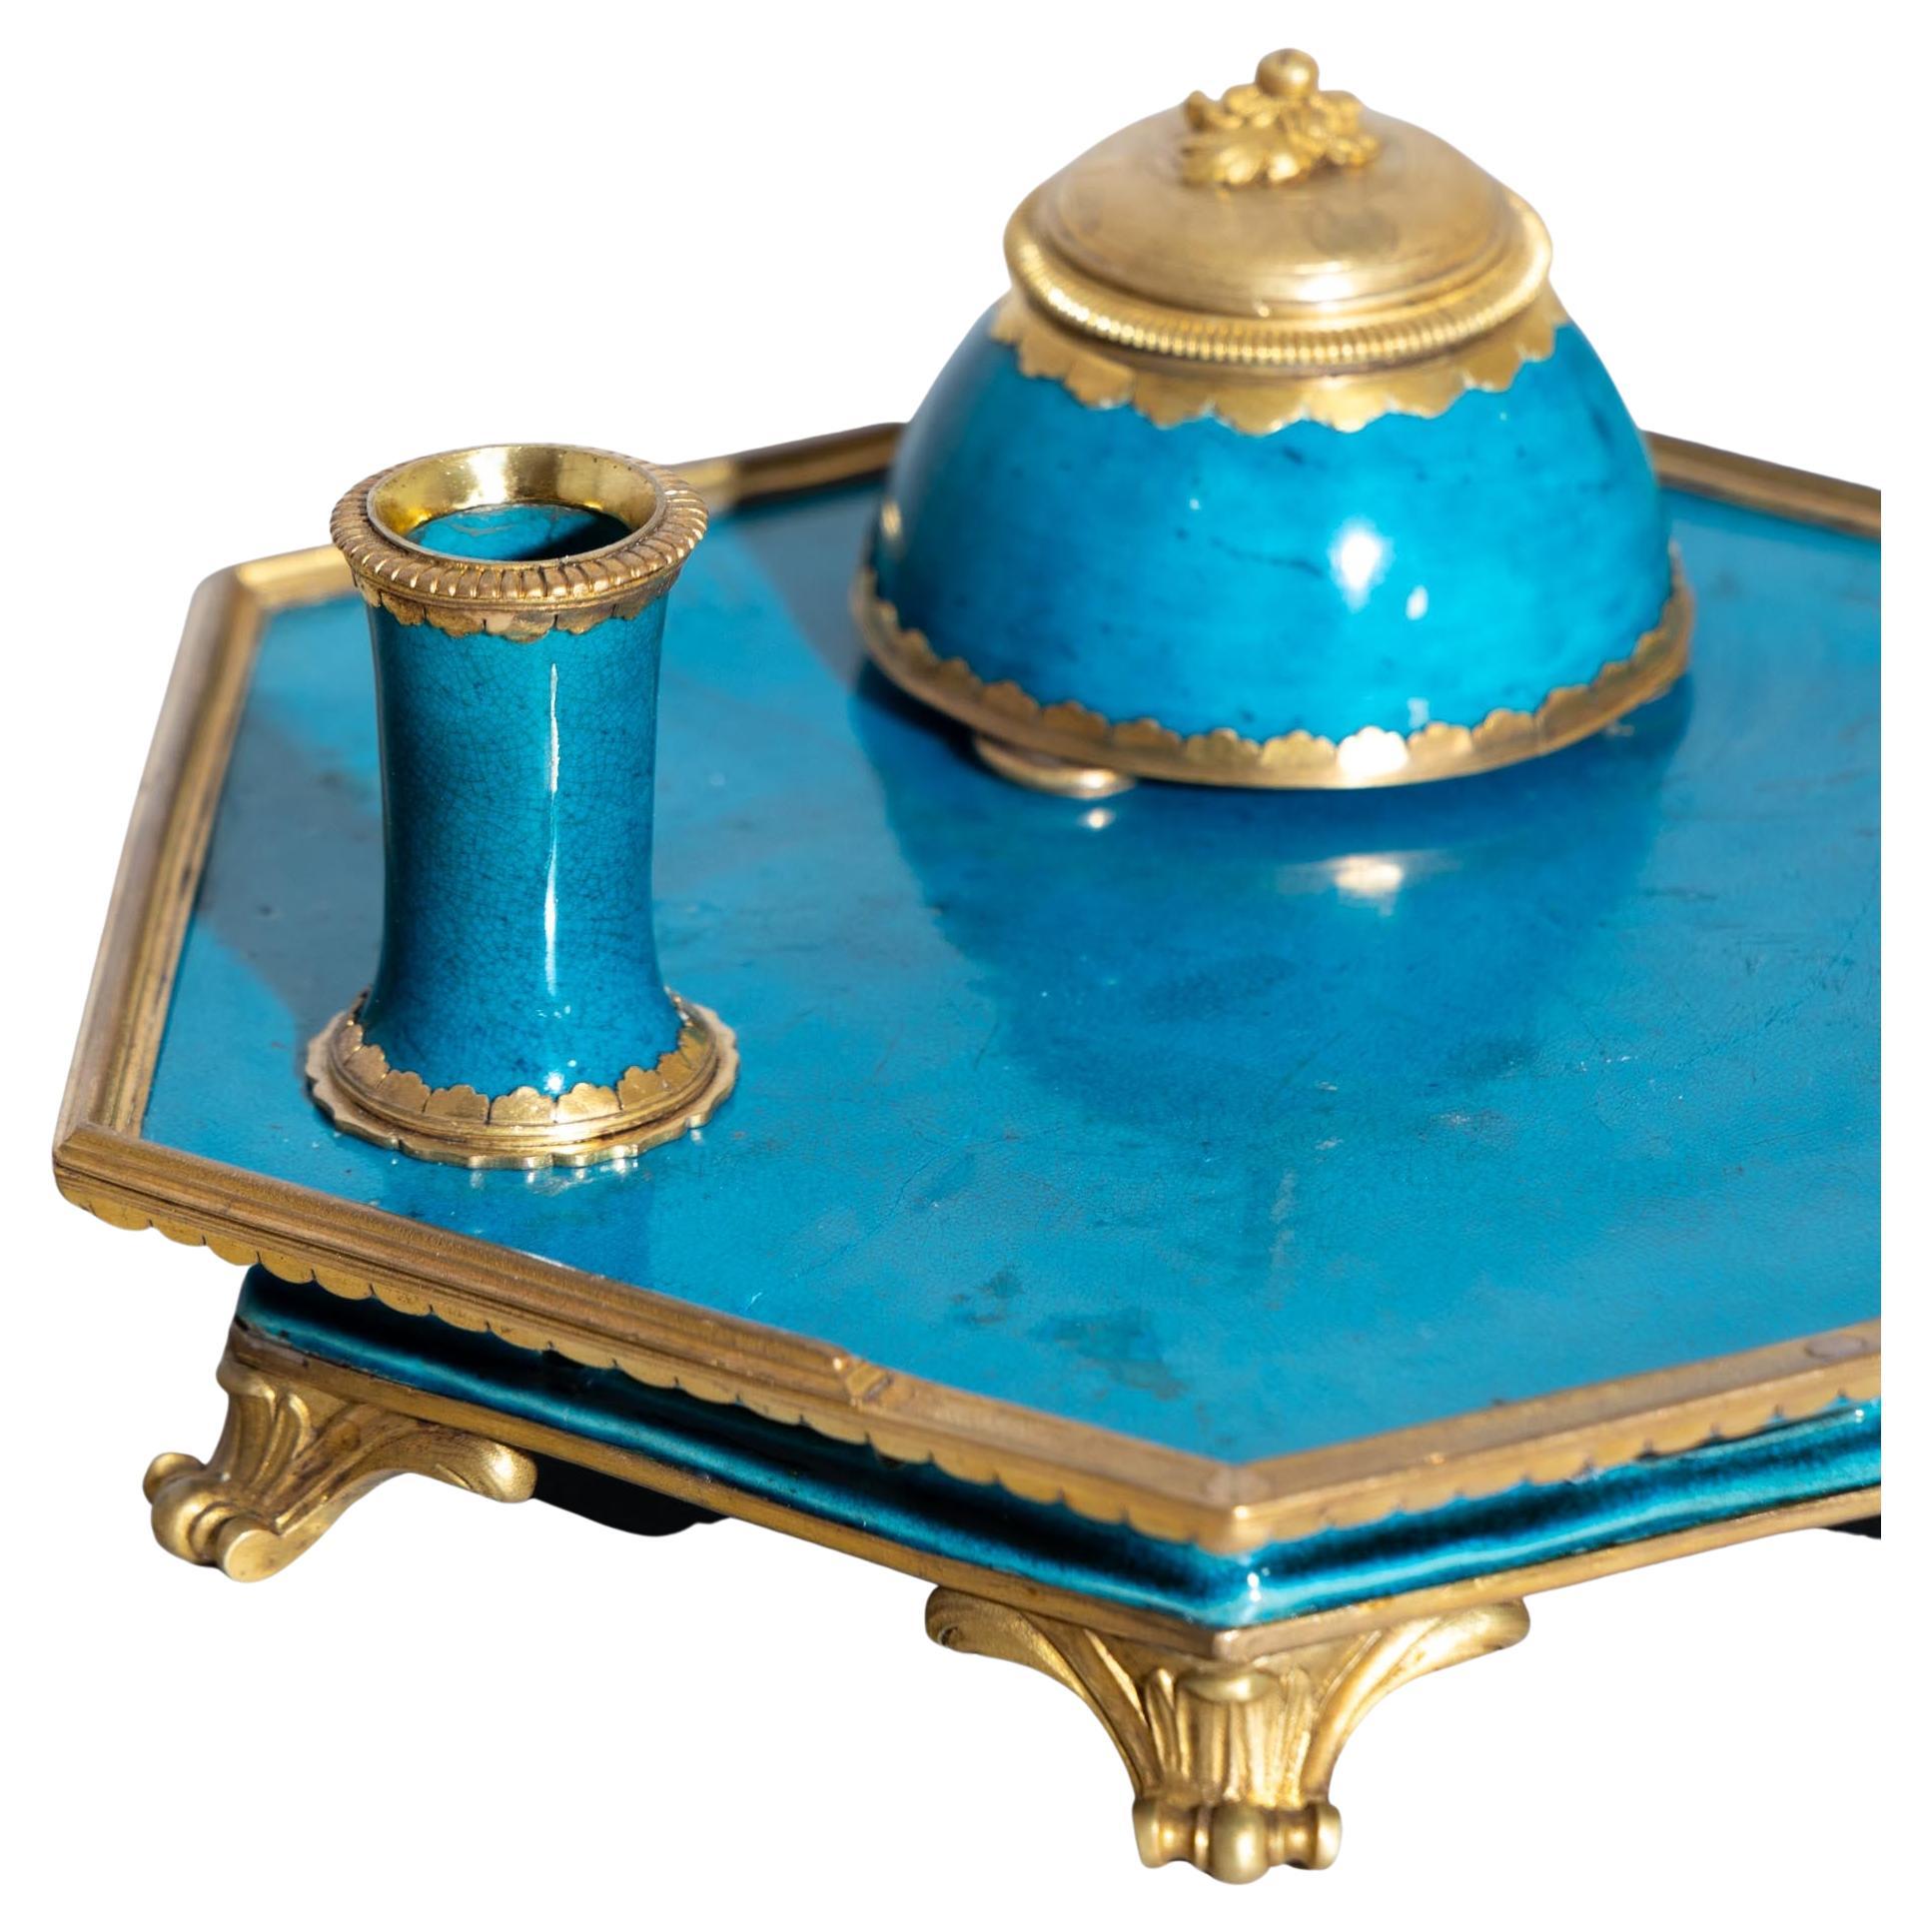 Hexagonal porcelain desk set with turquoise blue glaze with fine craquelure. The tray stands on bronze rocaille feet and supports a bell-shaped inkwell with lid and a conical pen holder. The bronze mountings are European additions.